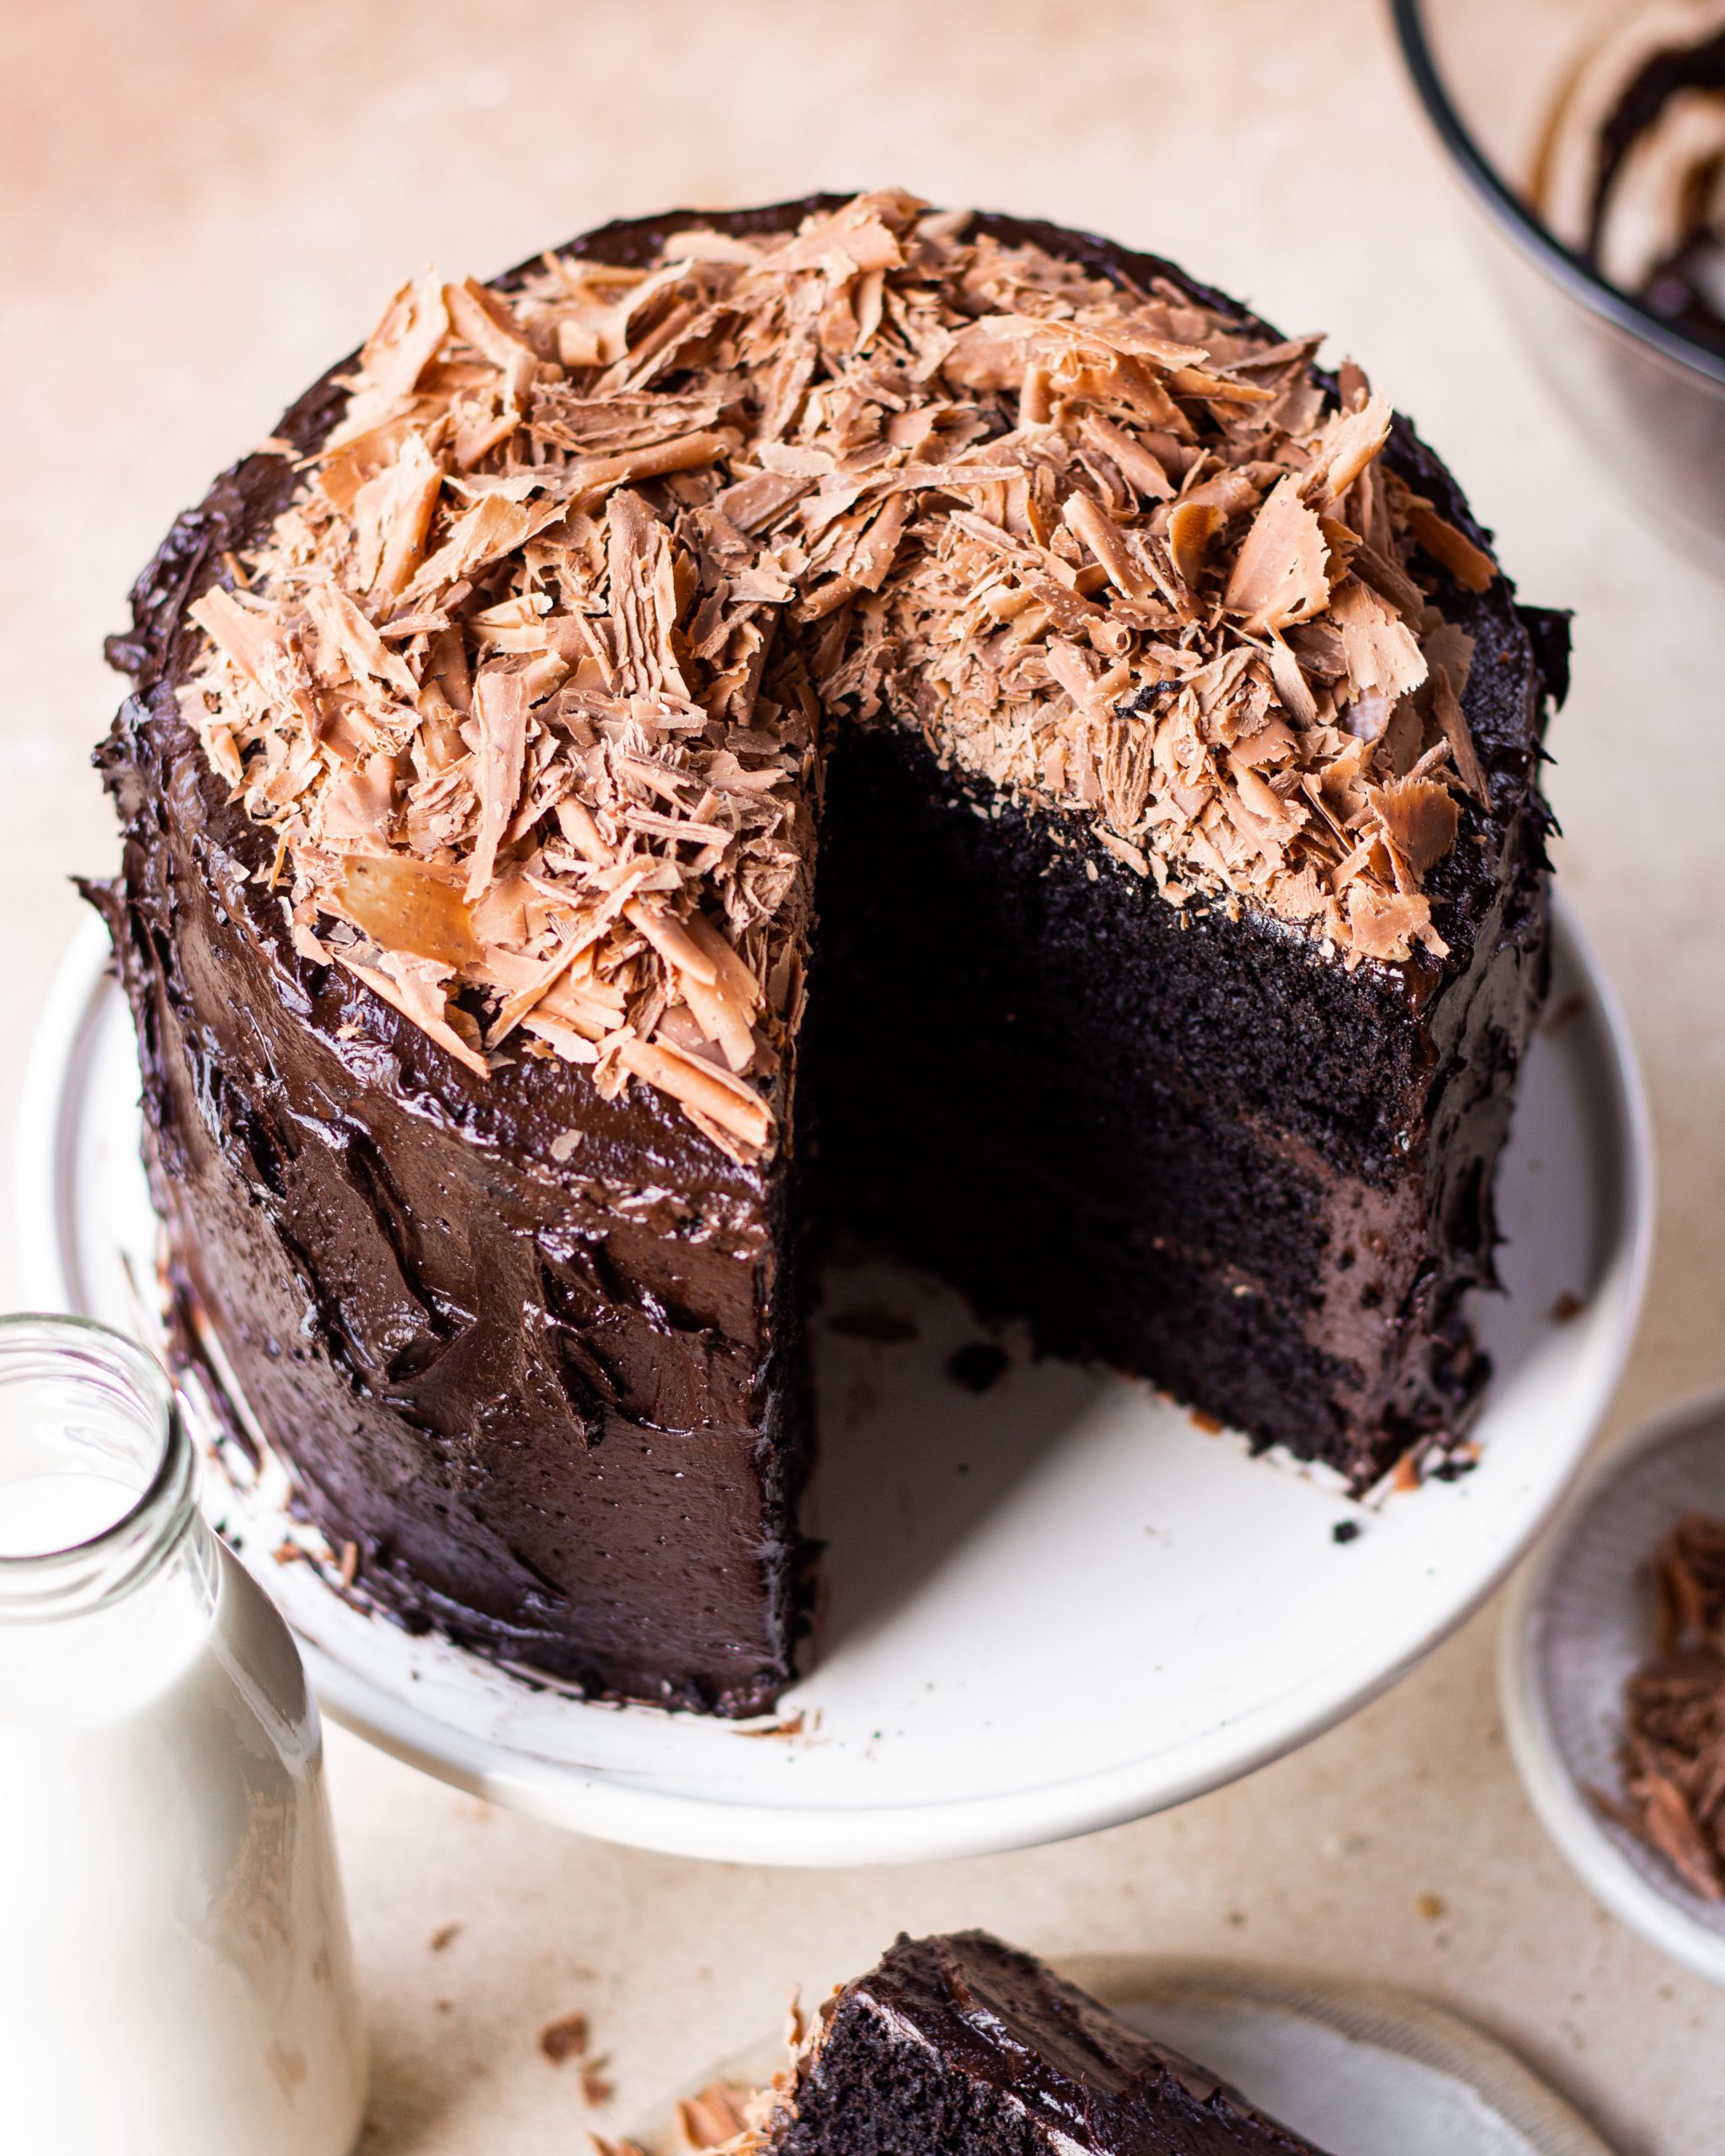 Chocolate Cake Recipe – No Eggs, No Milk, No butter - The Cooking Foodie